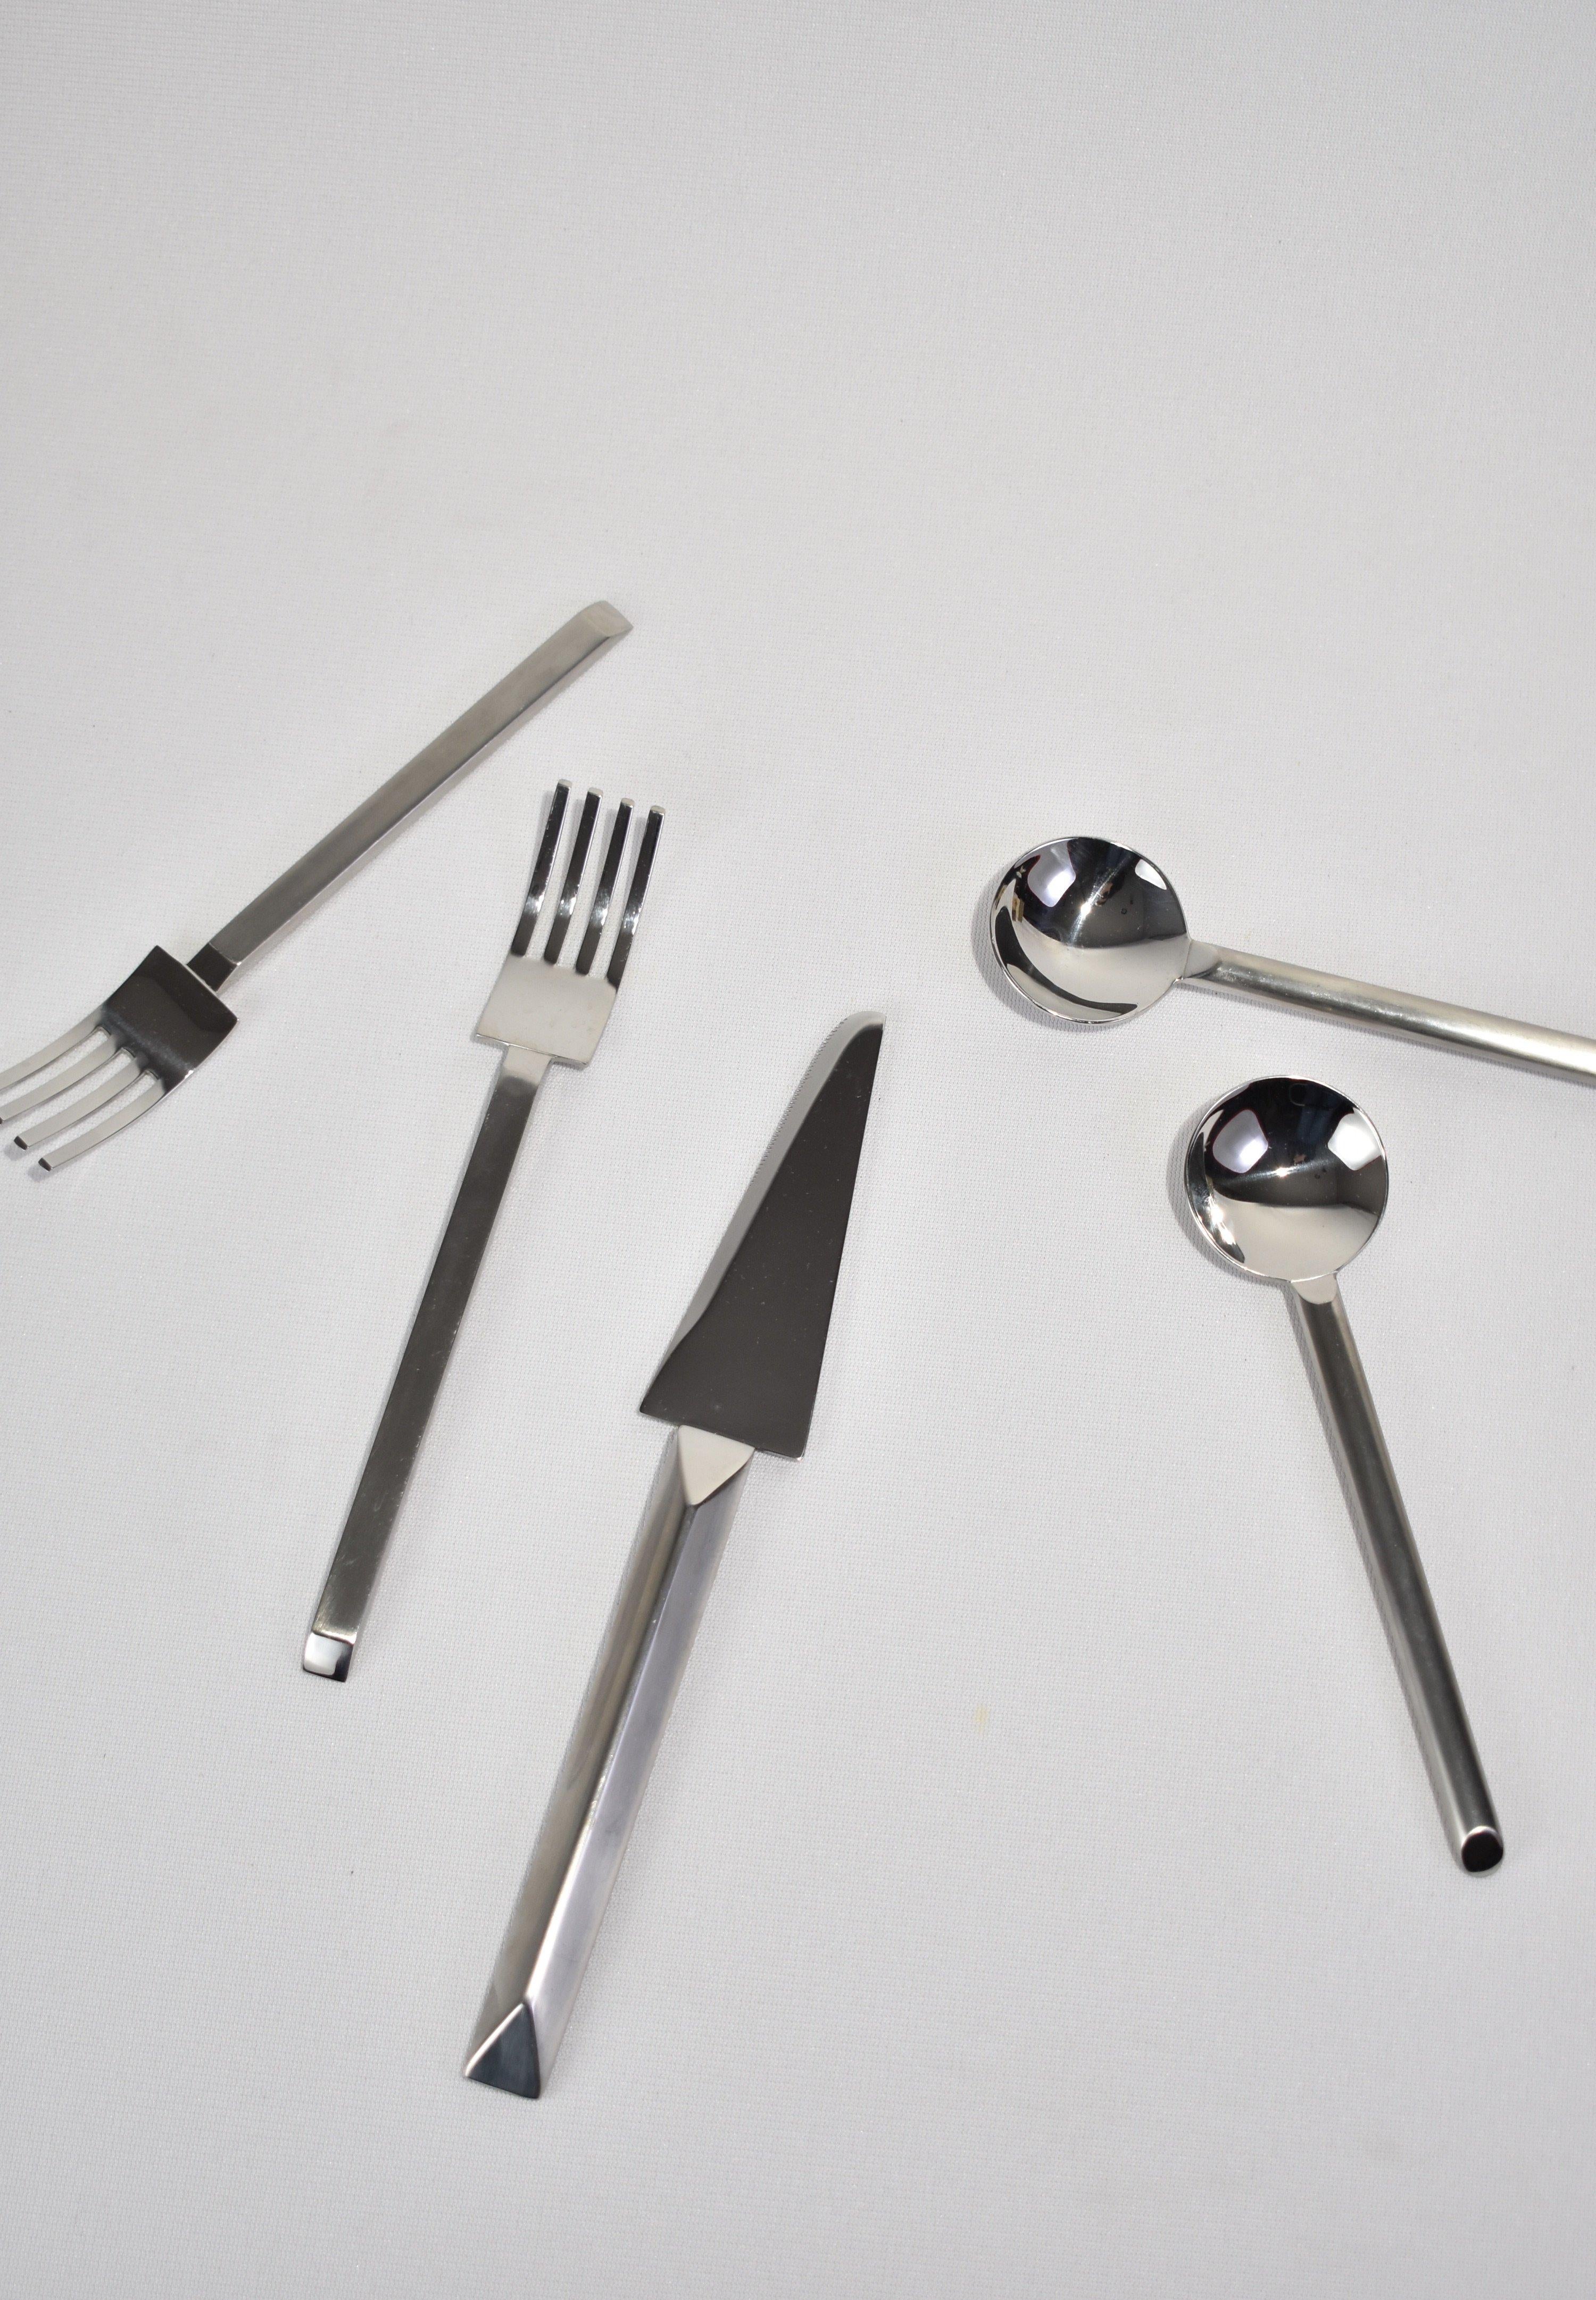 Rare, stainless steel sculptural flatware set by Kam Yamazaki. Crafted in Japan, ca. 1993. 

Dimensions:
Knife: 9.5